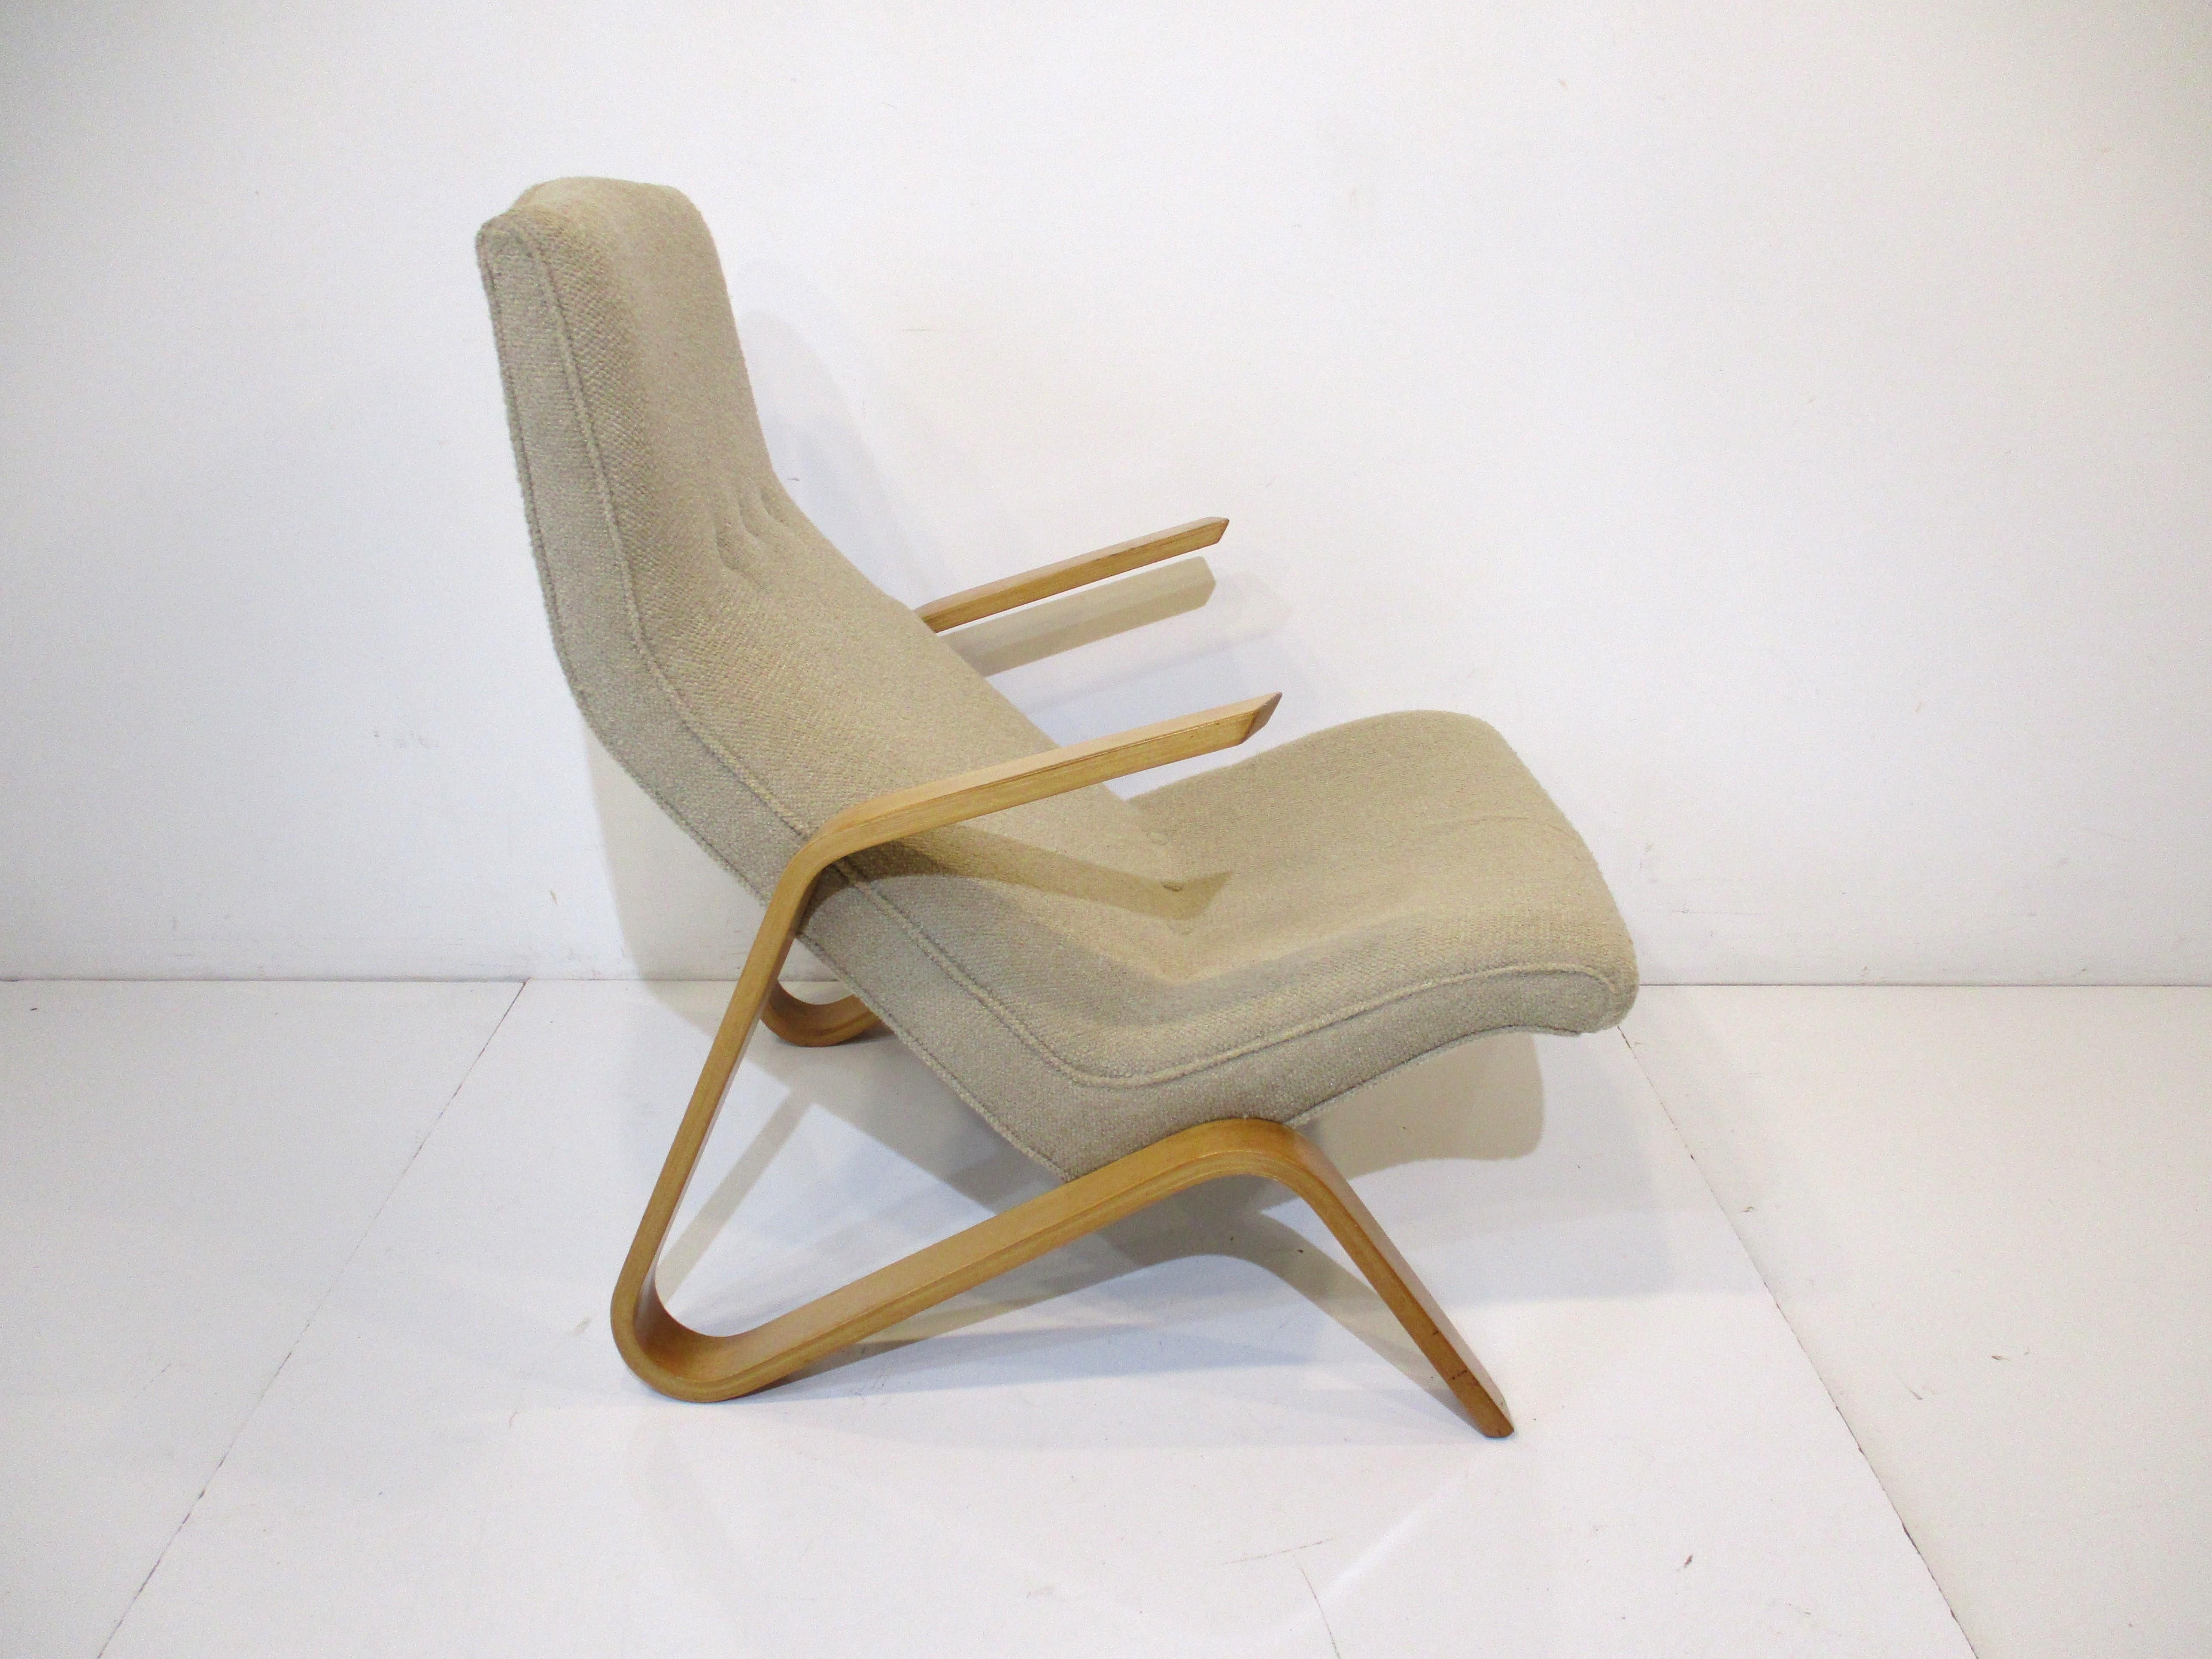 A early Grasshopper lounge chair with sculptural wood arms and a light taupe toned upholstery with button front. The bent wood arms are in a lighter birch wood and set at an angle with the high back and ergonomically correct sitting position for